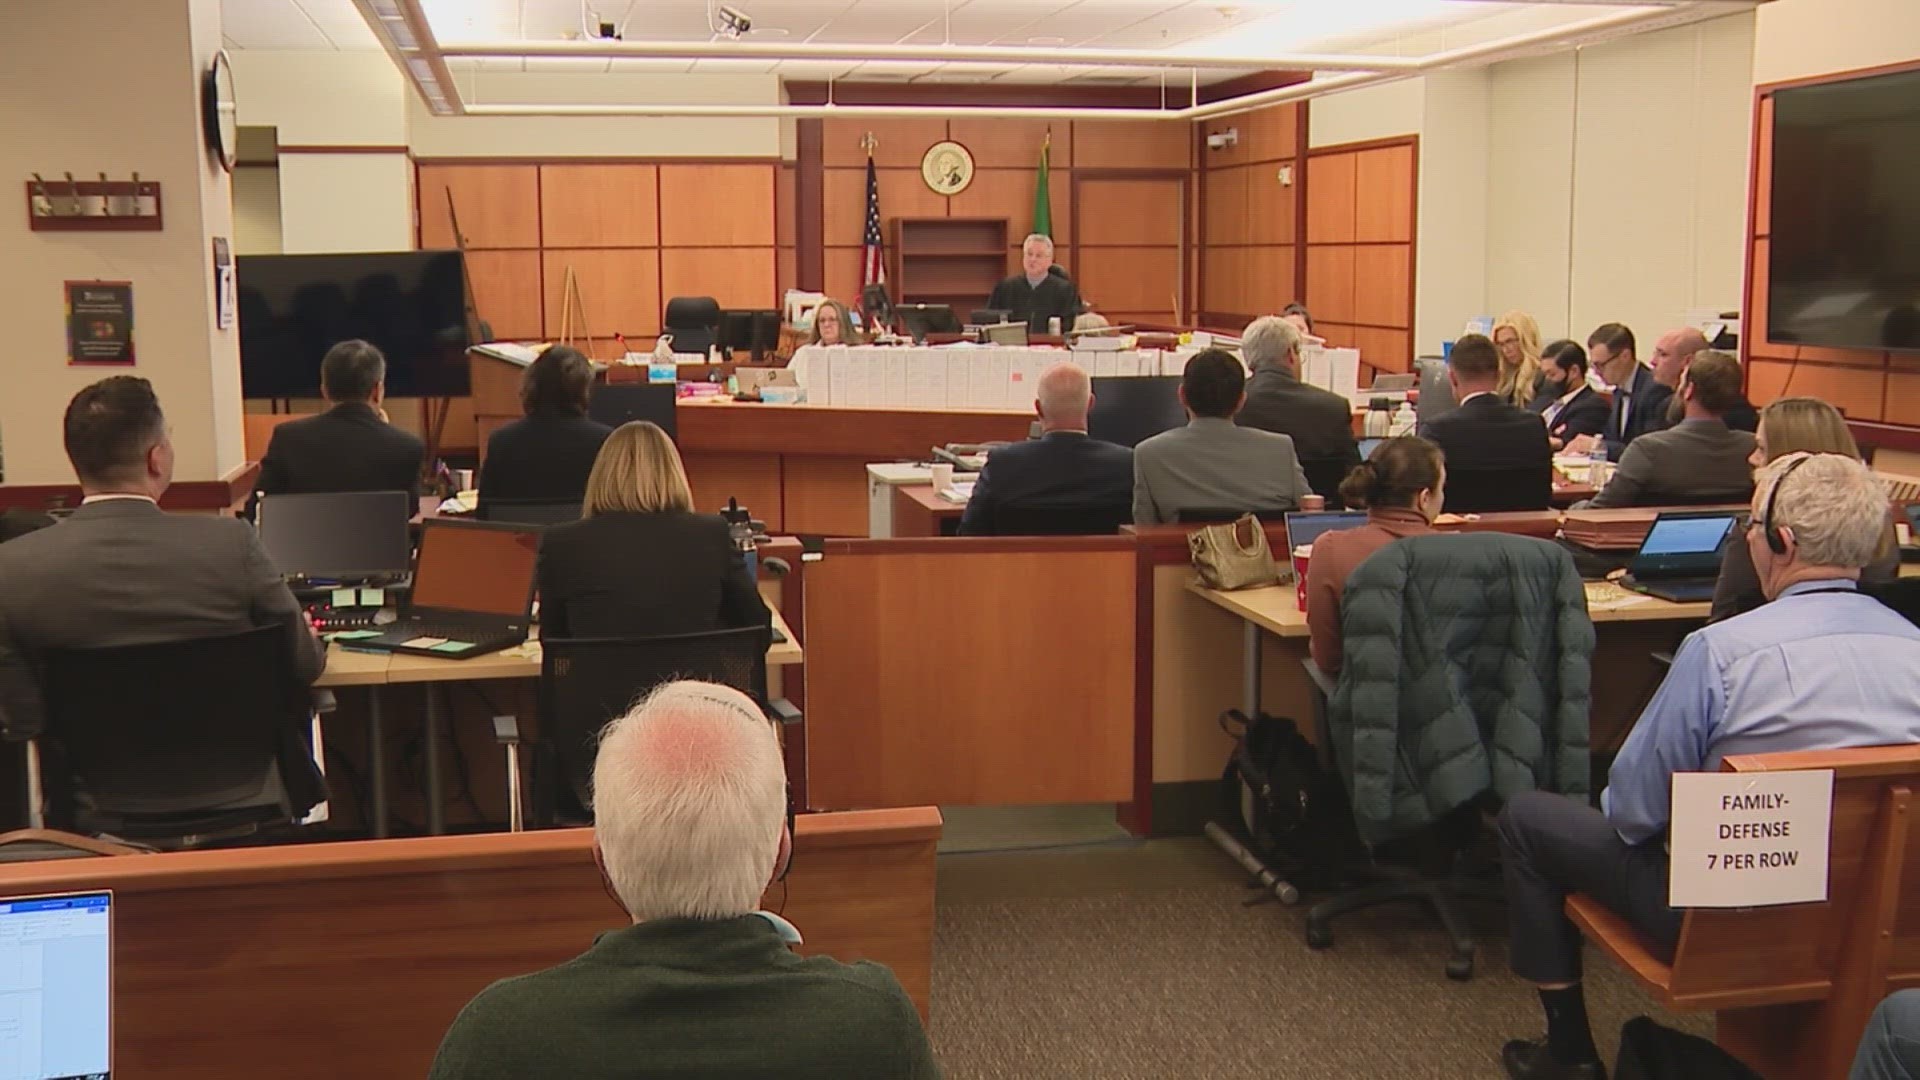 The jury is expected to begin deliberations Thursday.